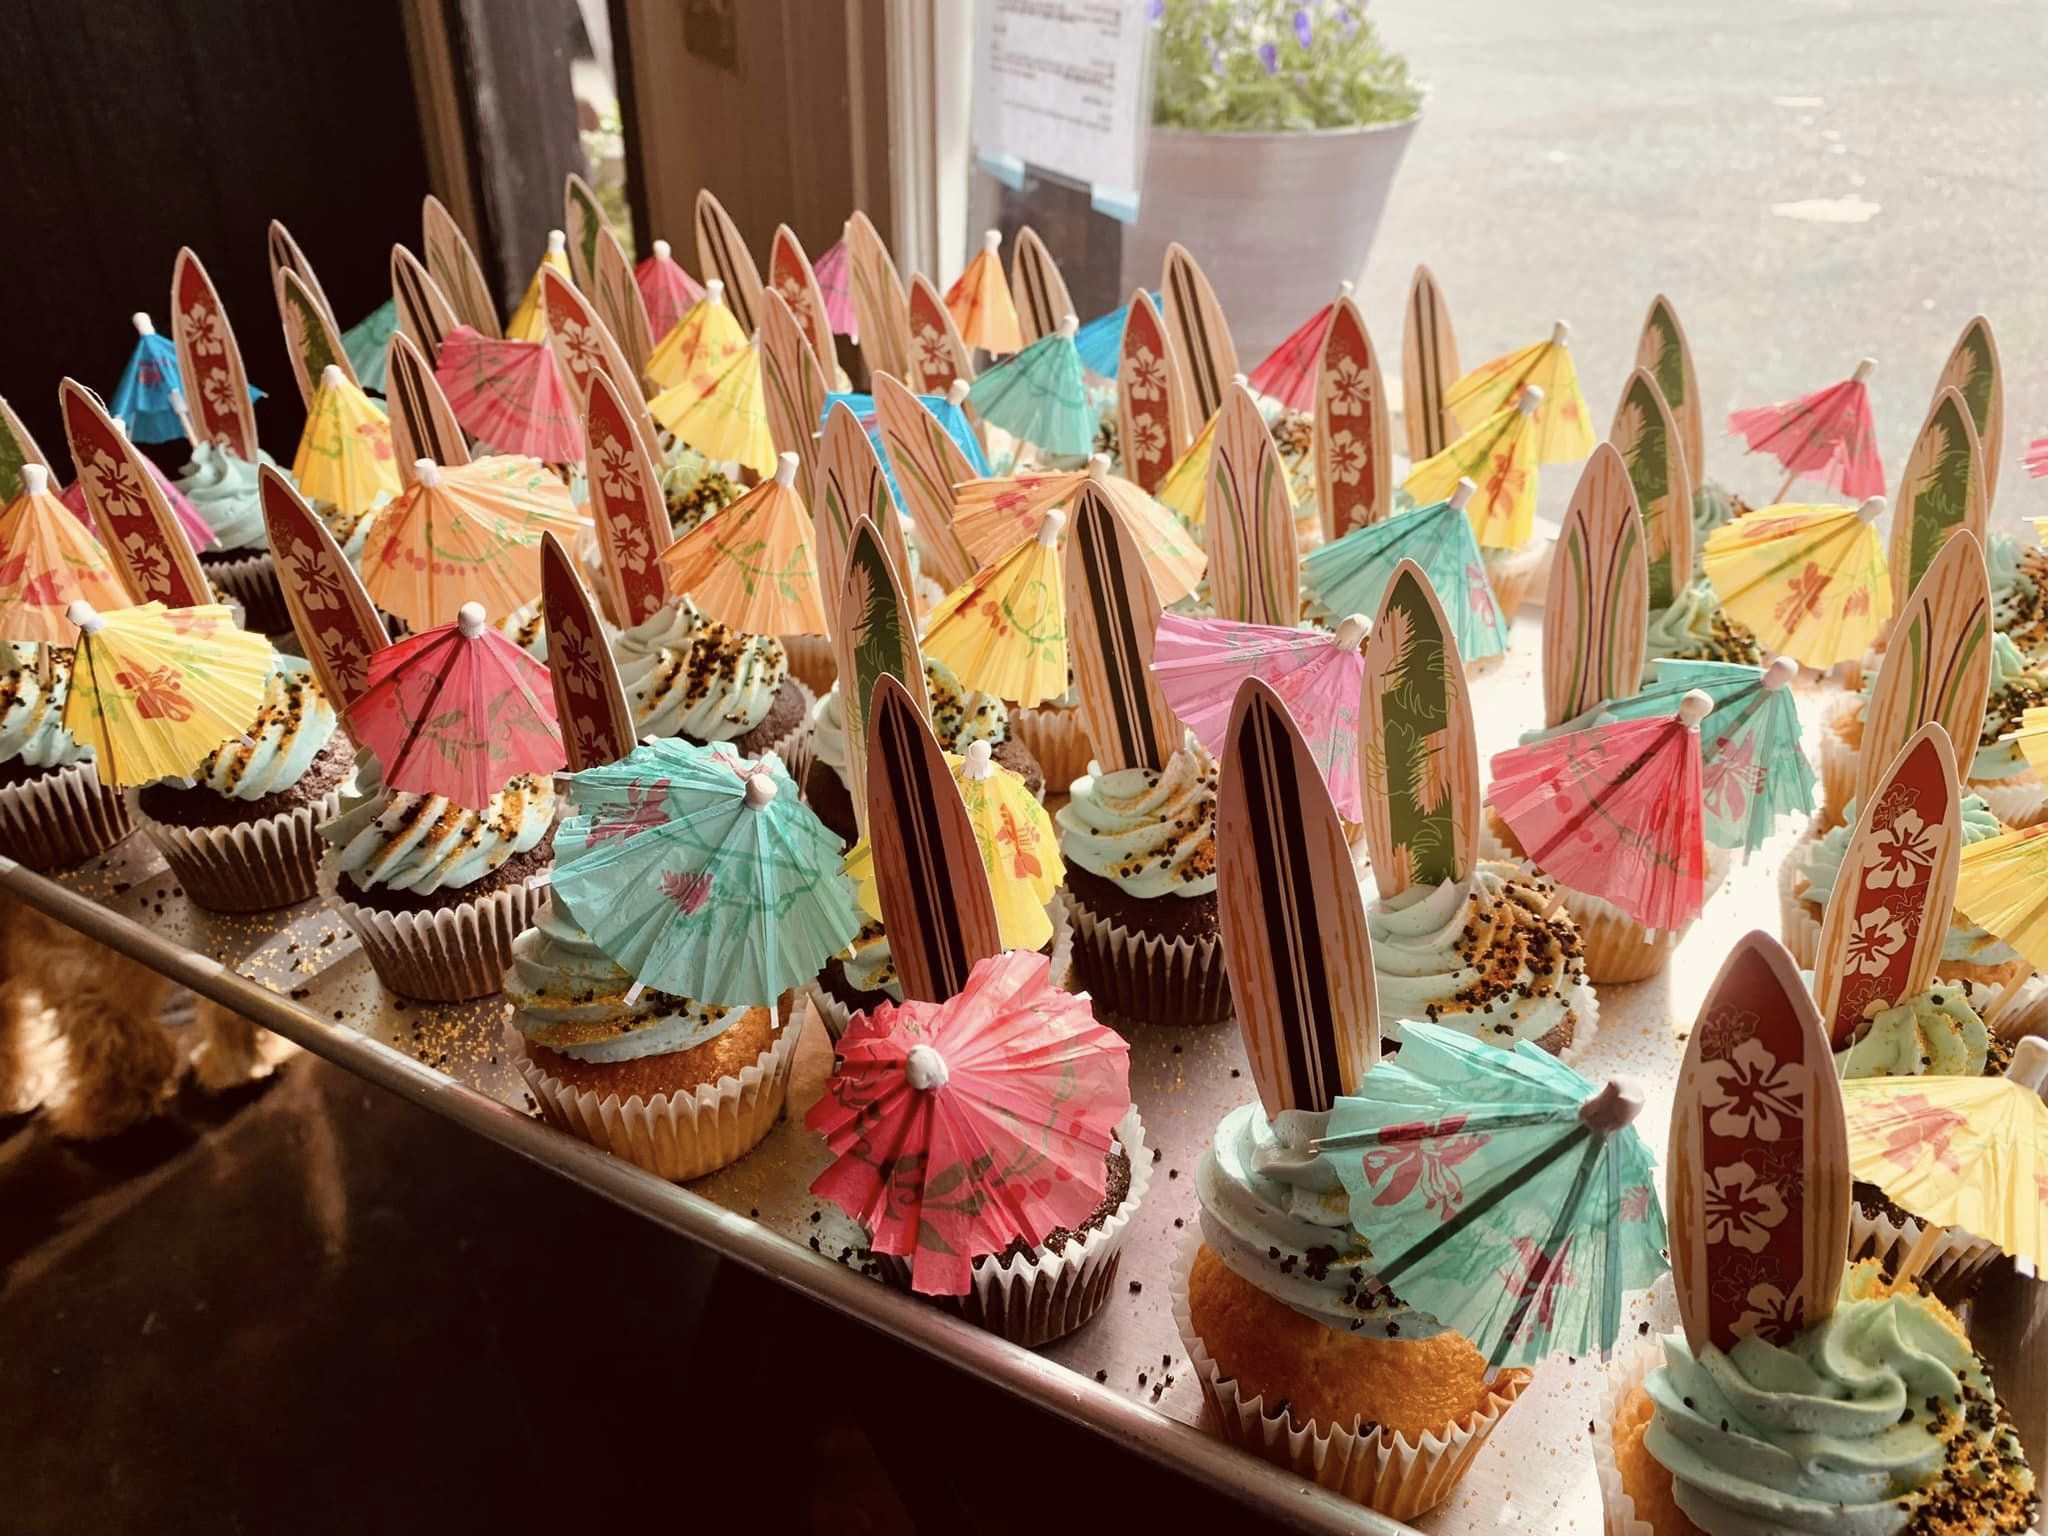 Cupcakes-2-Divine-South-Coast-Kitchen-and-Catering-Gold-Beach-Oregon.jpg